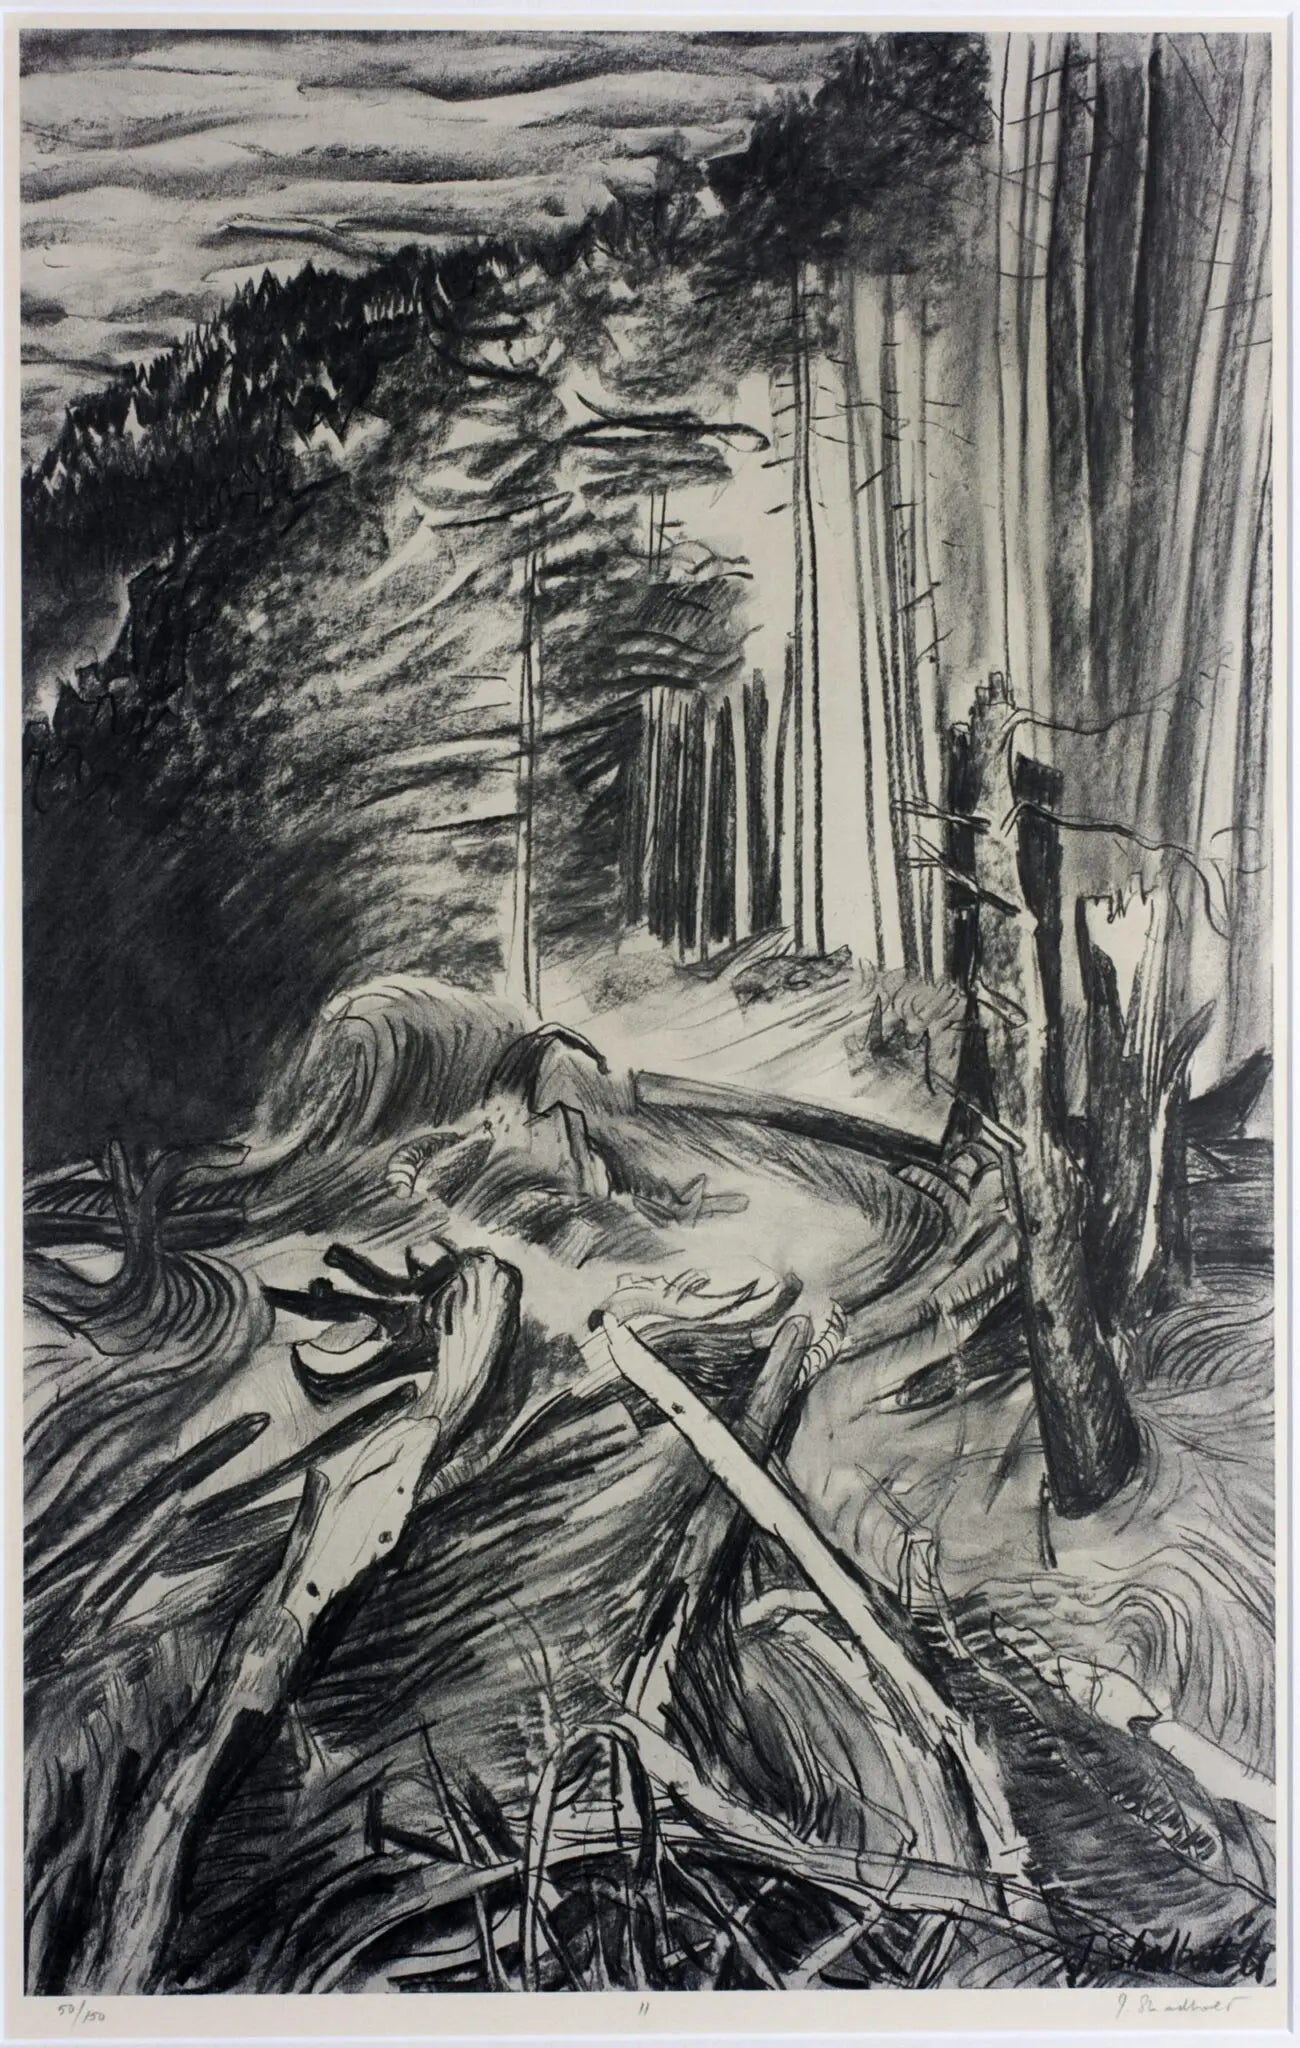 The Hornby Suite: Homage To Emily Carr #11, 1968-69